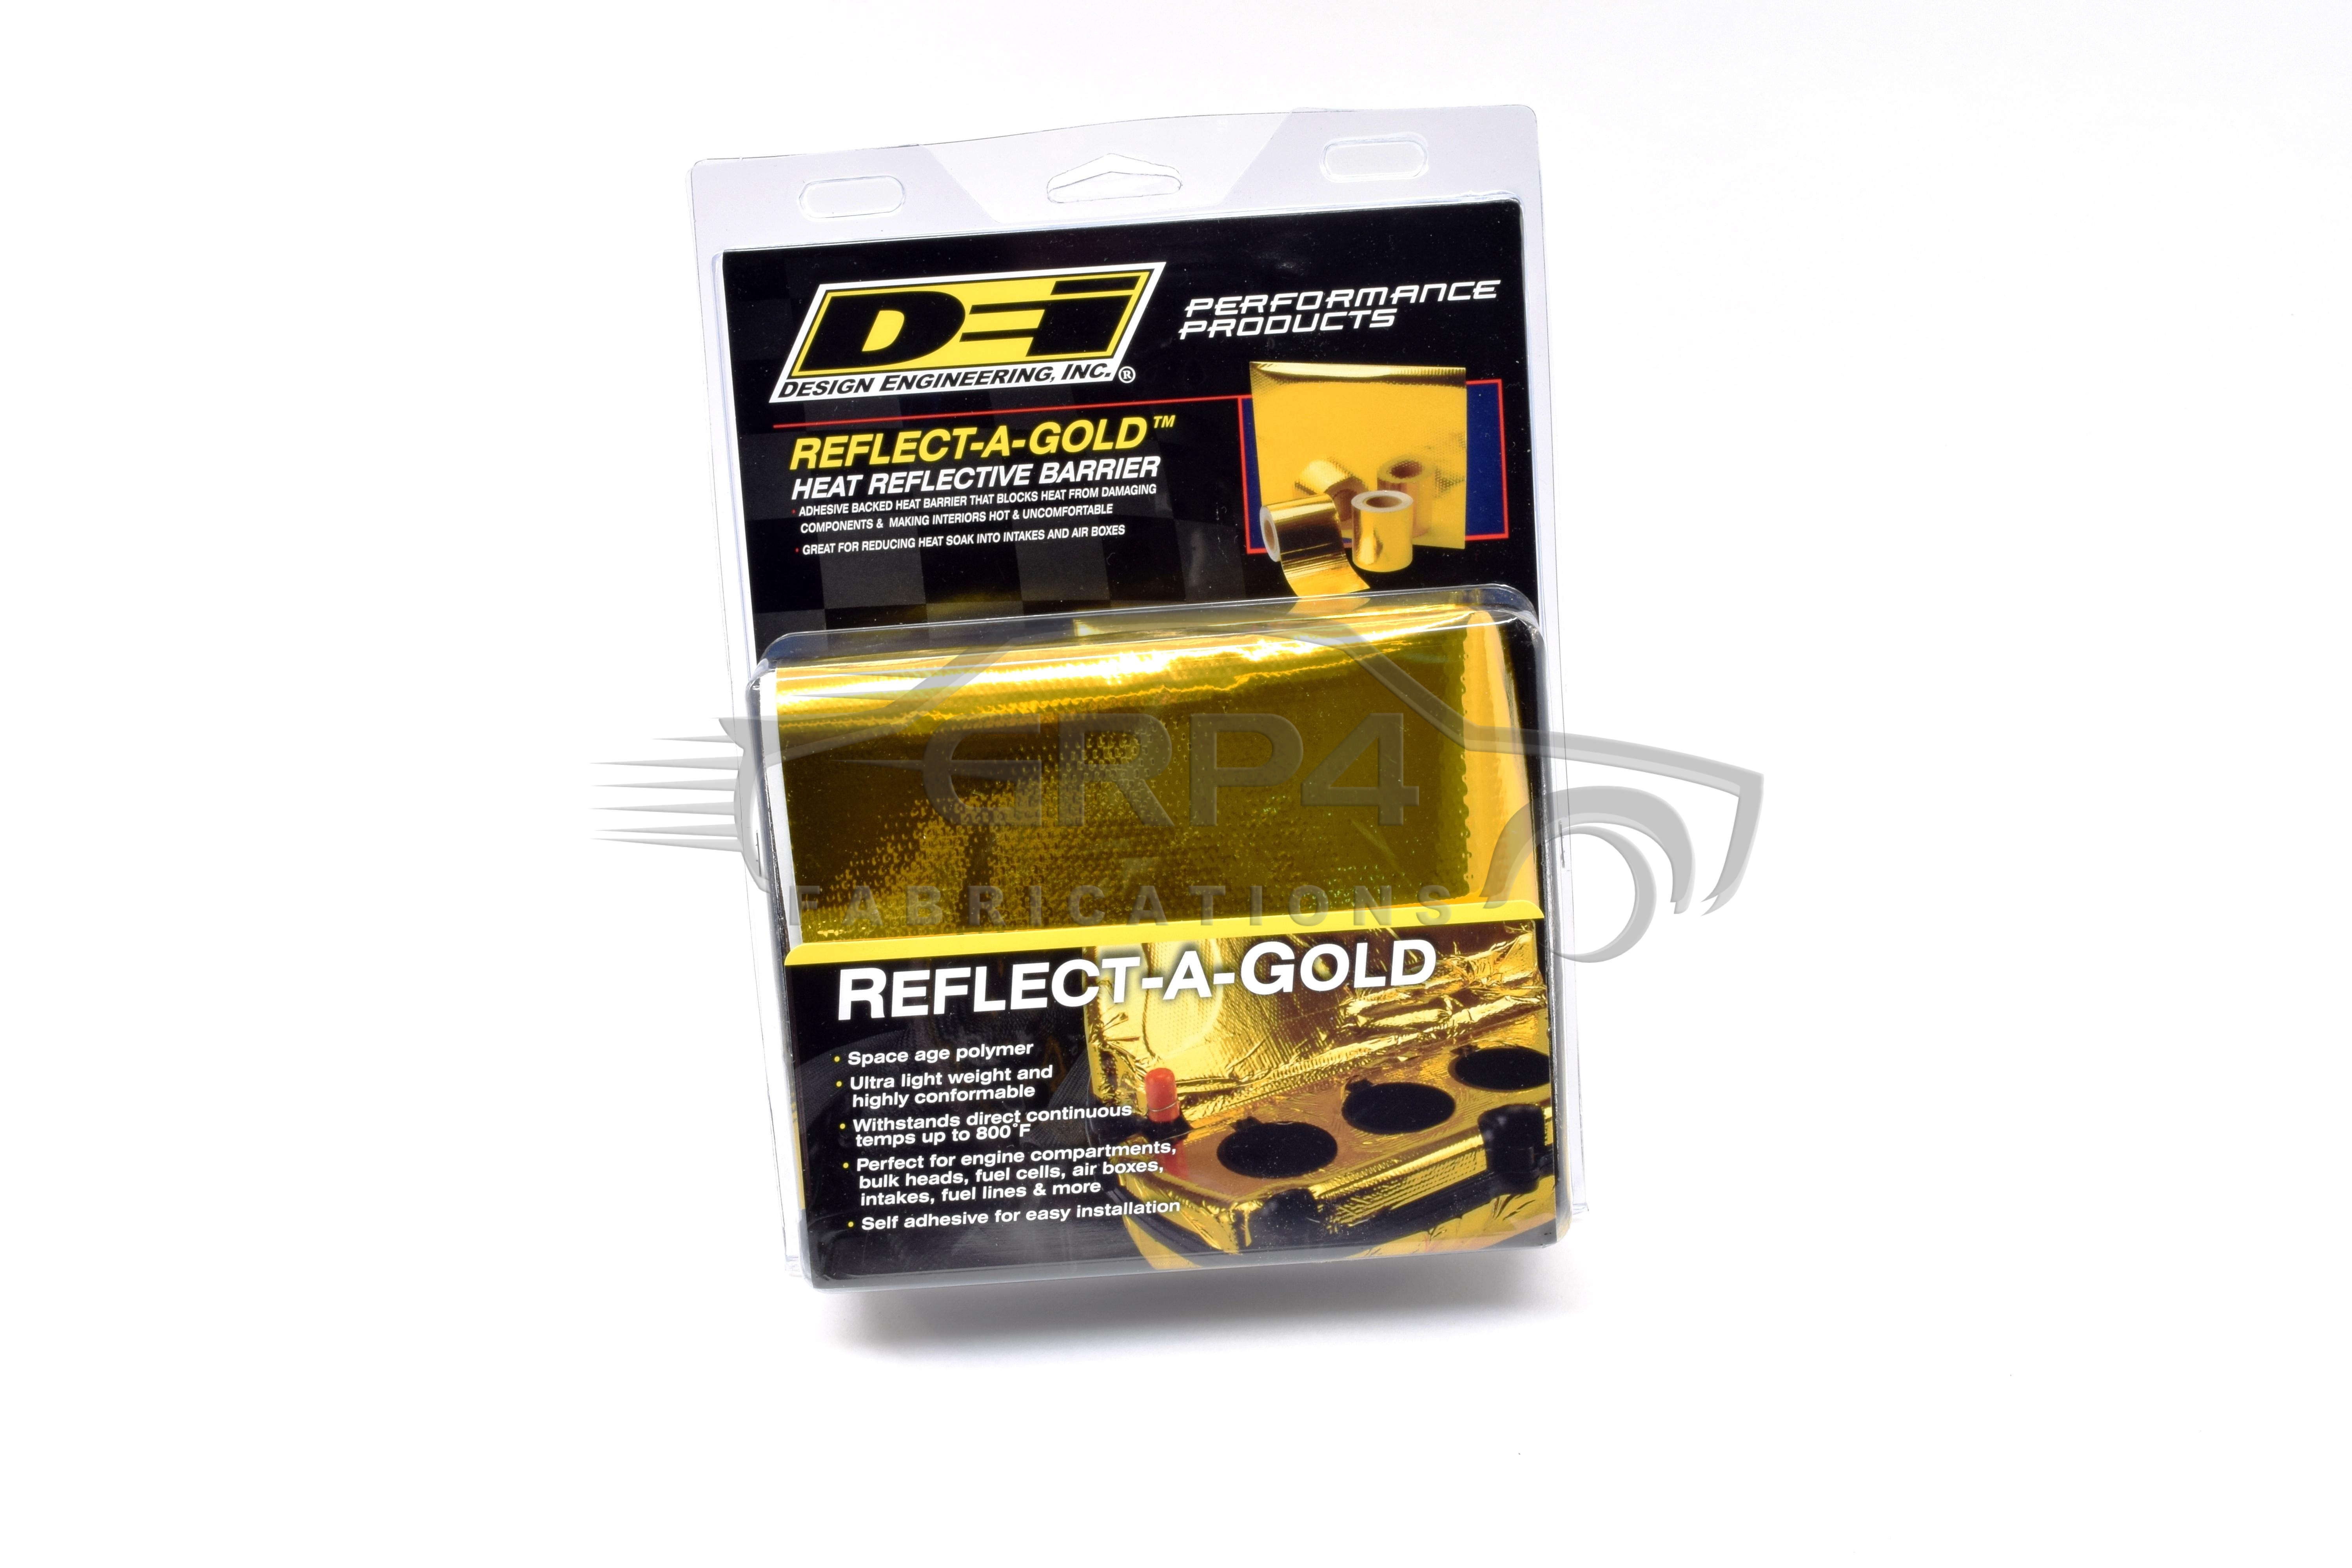 DEI 010397 - Reflect-A-GOLD 2in x 30ft Tape Roll